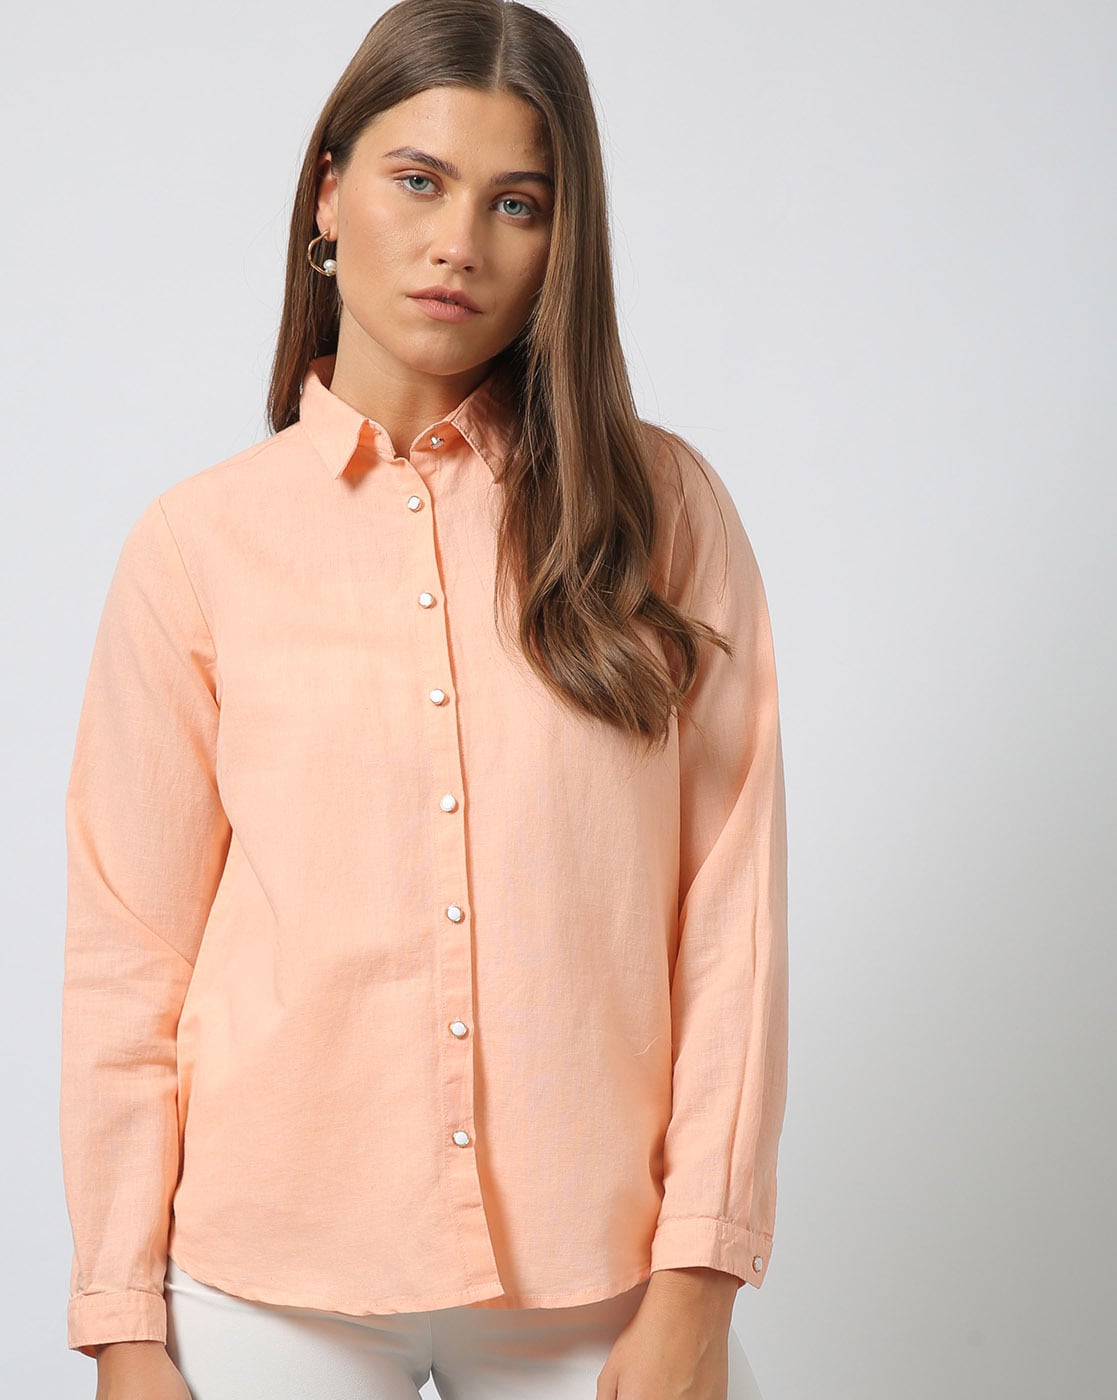 Buy Peach Shirts for Women by Outryt ...